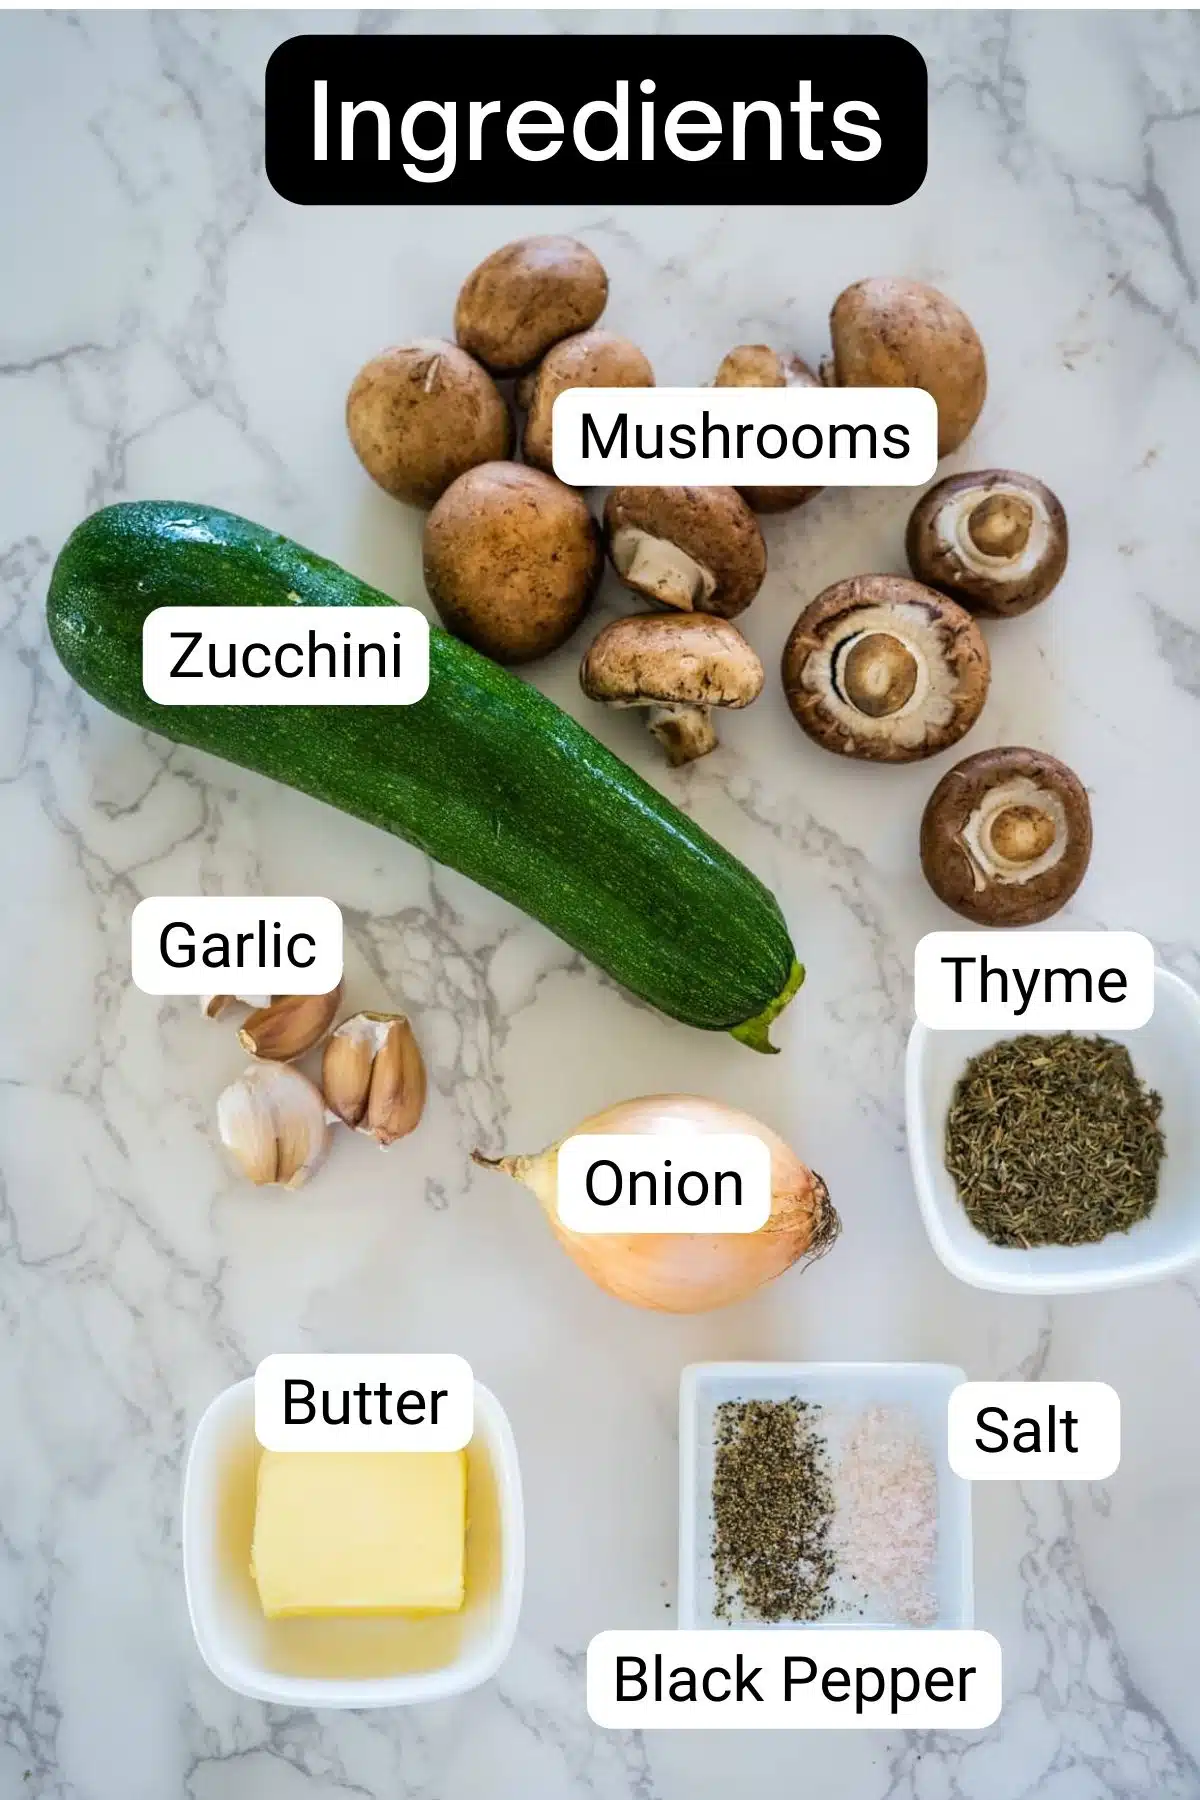         Ingredients for a recipe for zucchini and mushroom risotto.